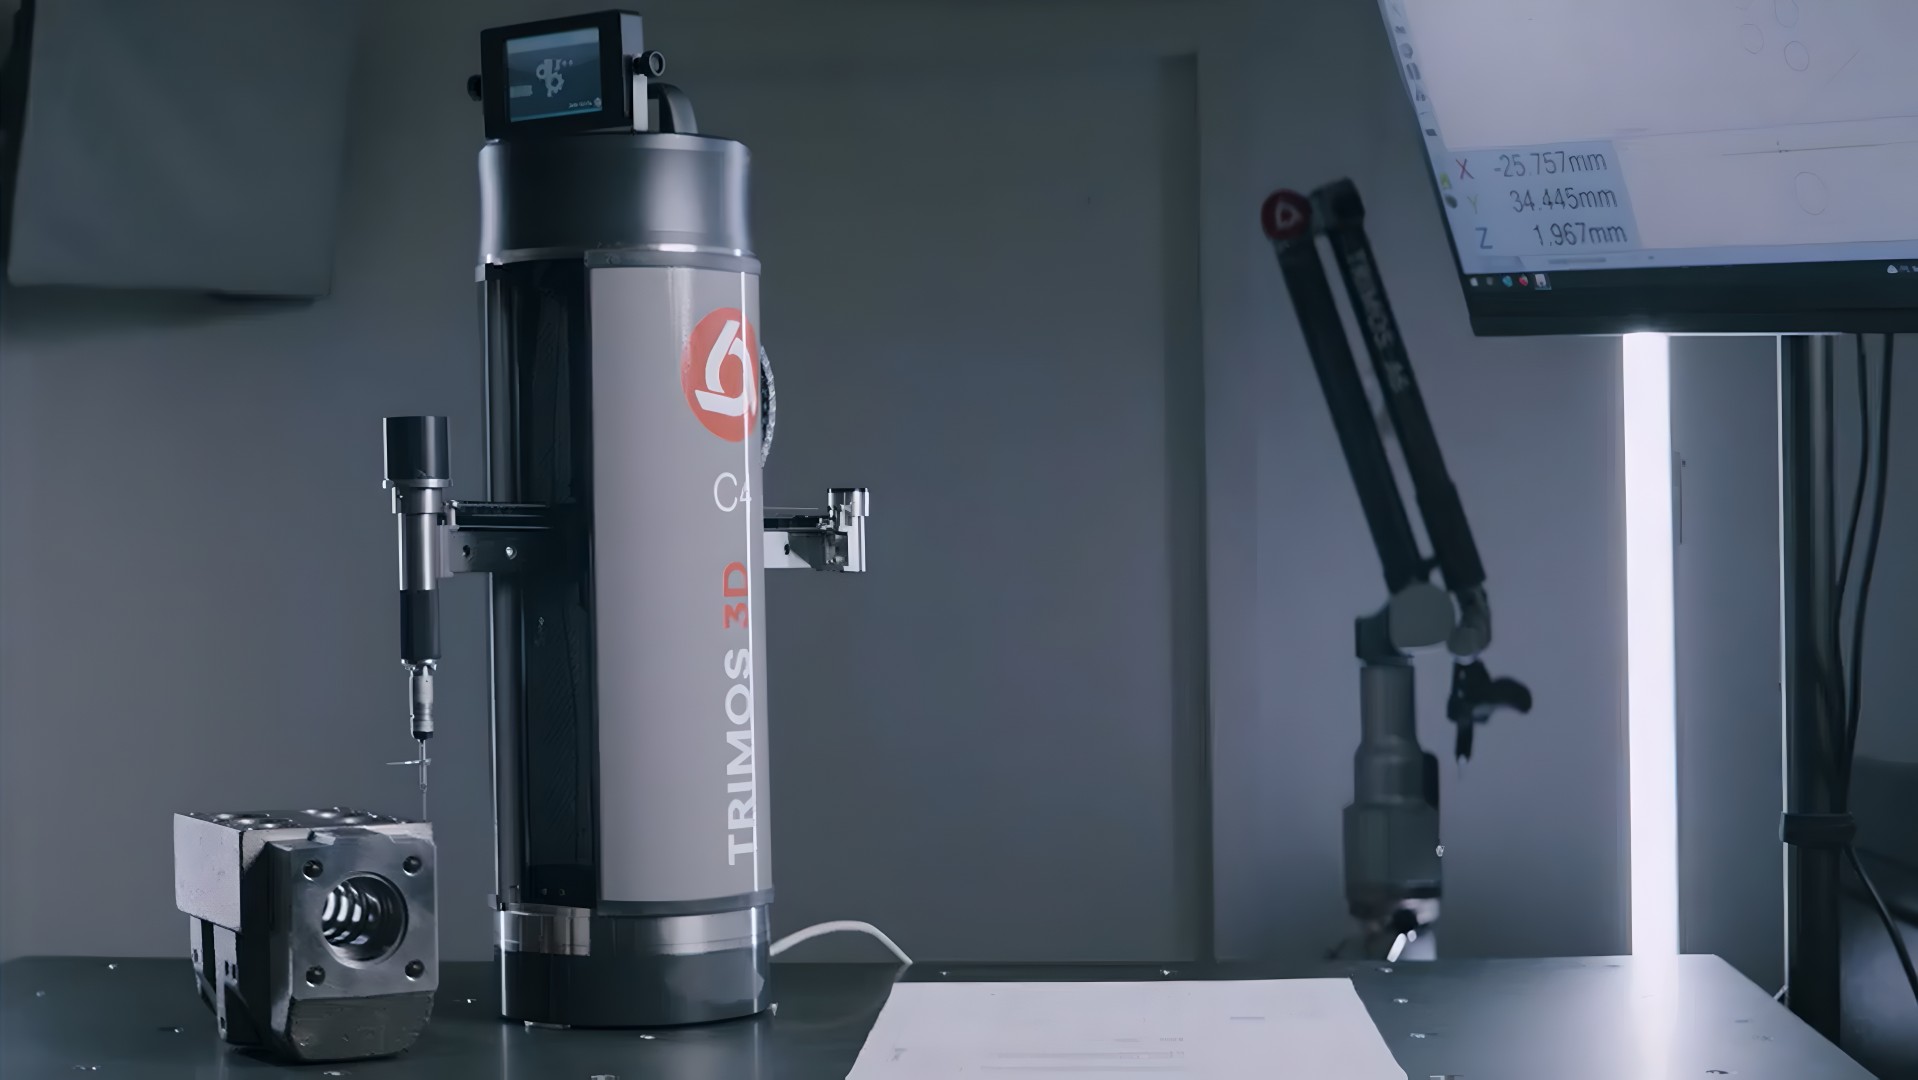 Precision Measuring Instruments from Trimos for dimensional metrology